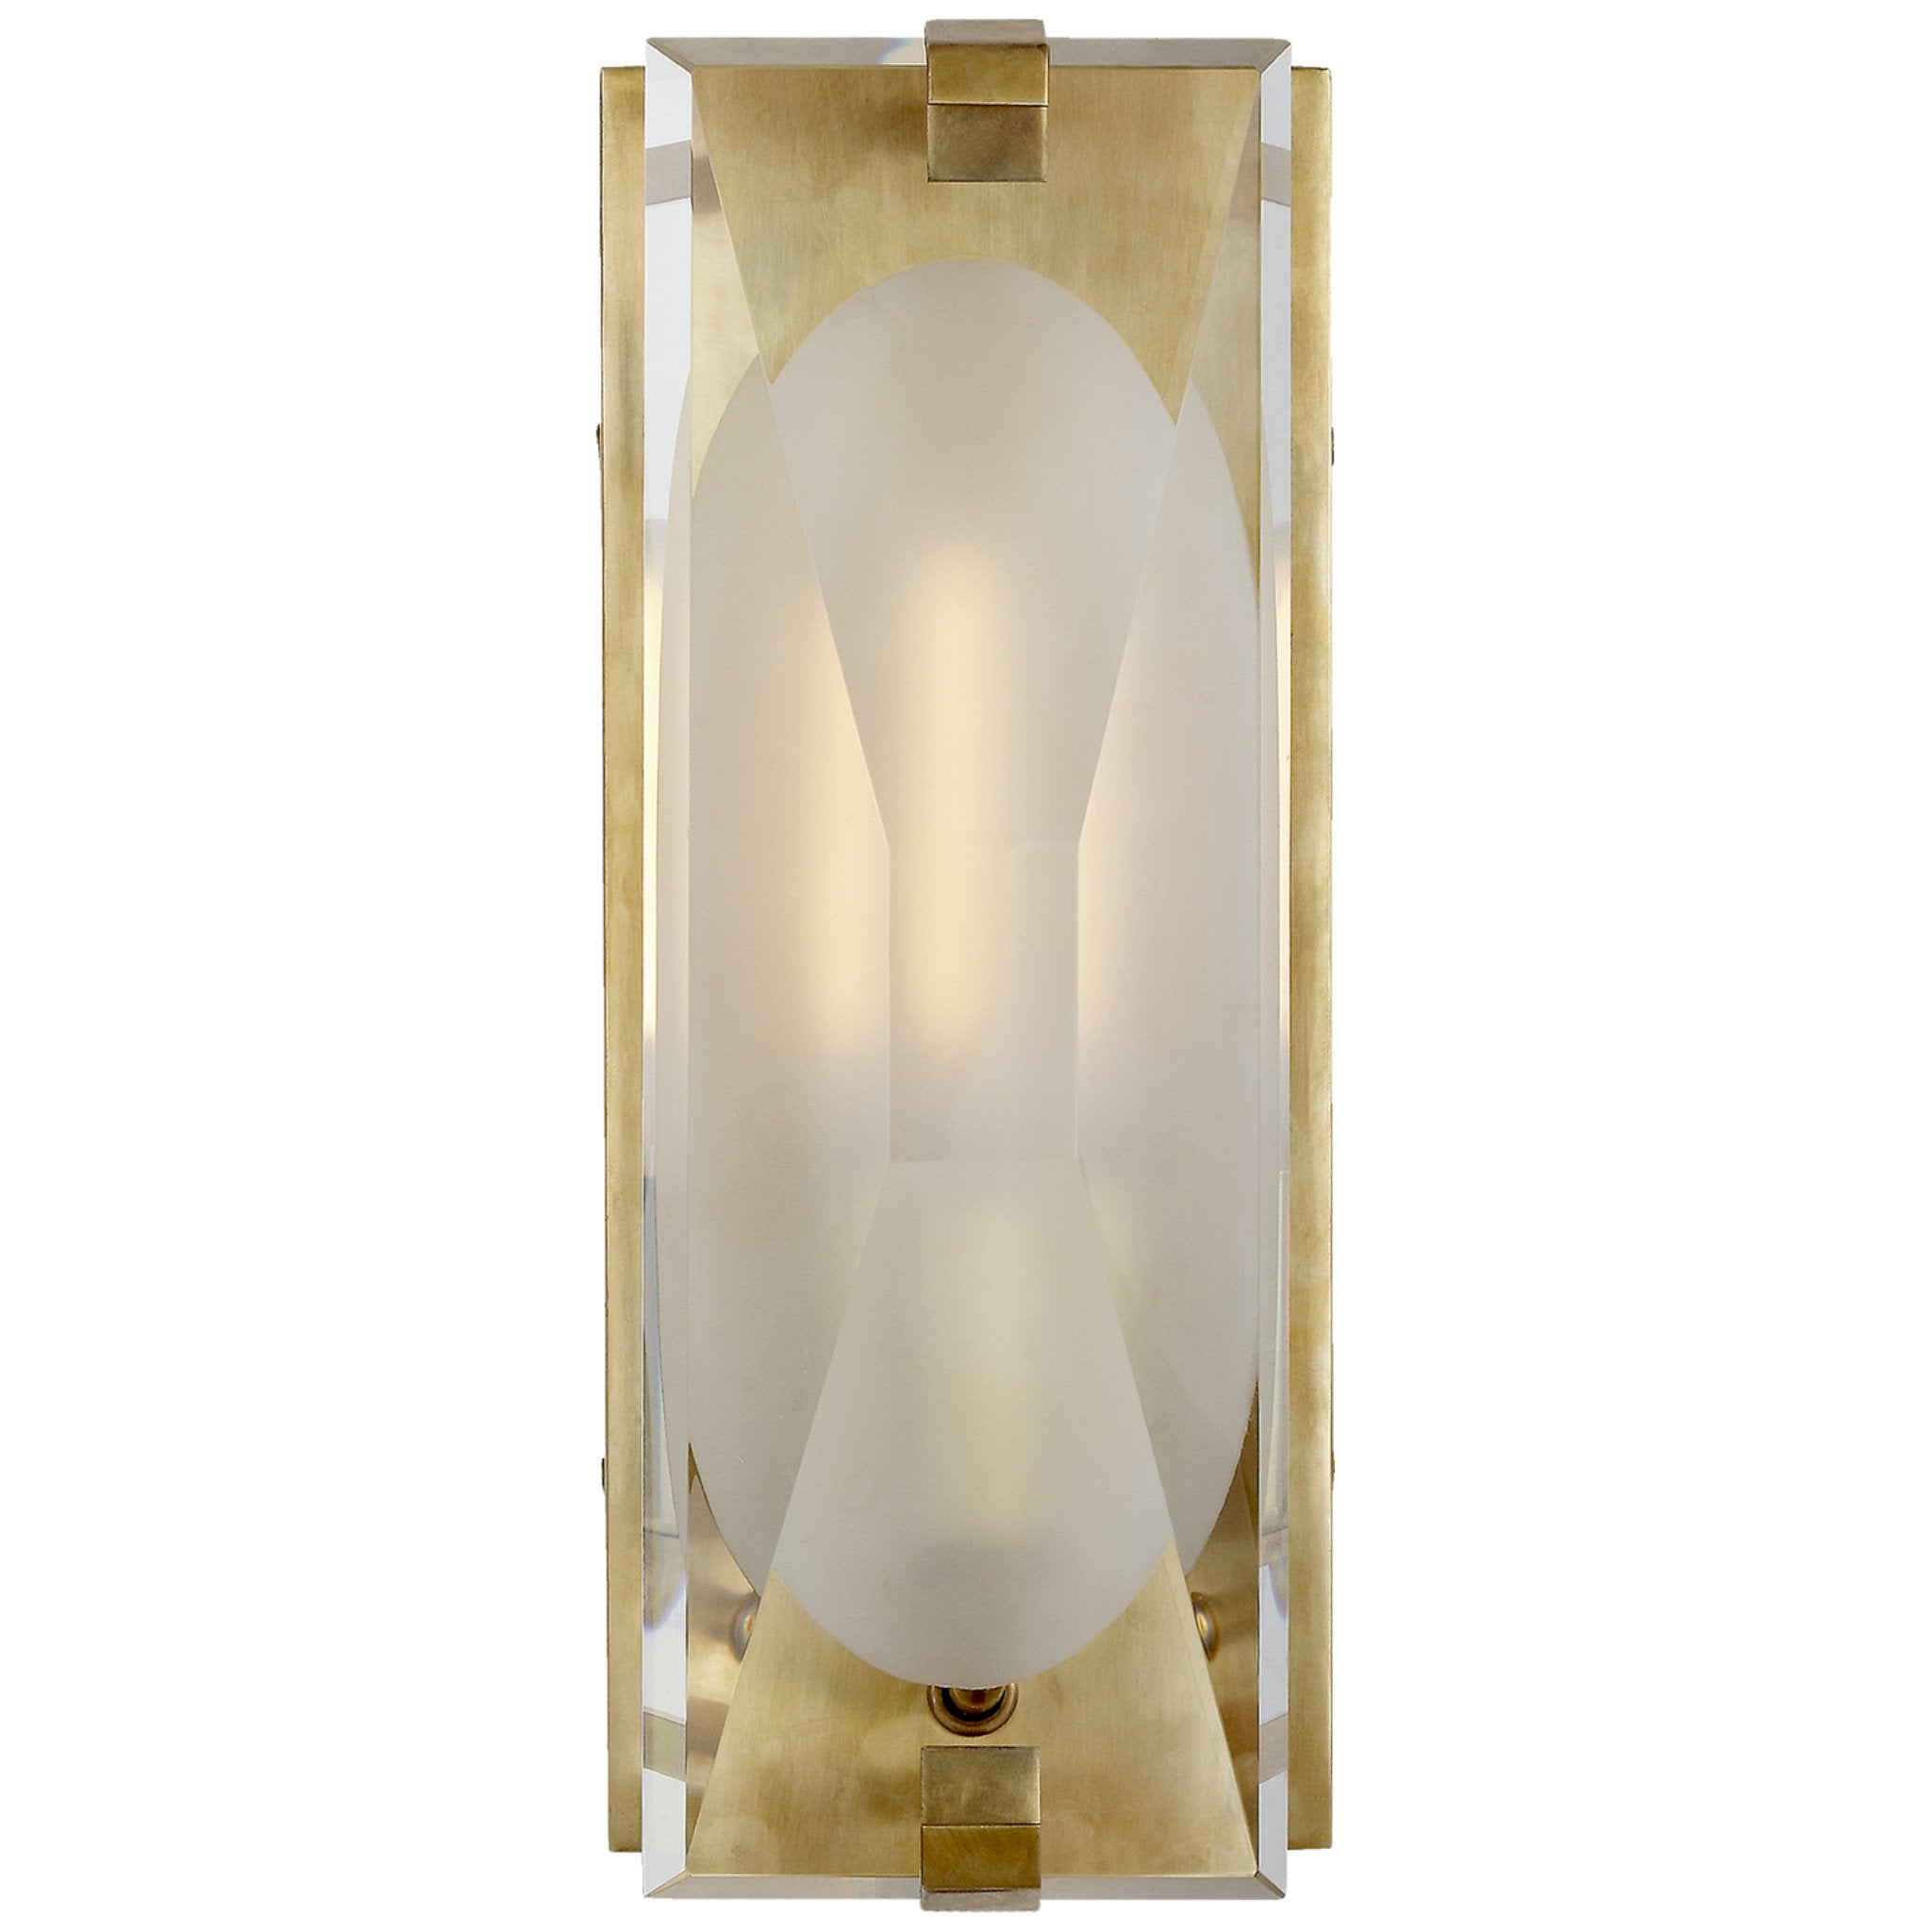 kate spade new york Castle Peak Small Bath Sconce in Soft Brass with Etched Clear Glass